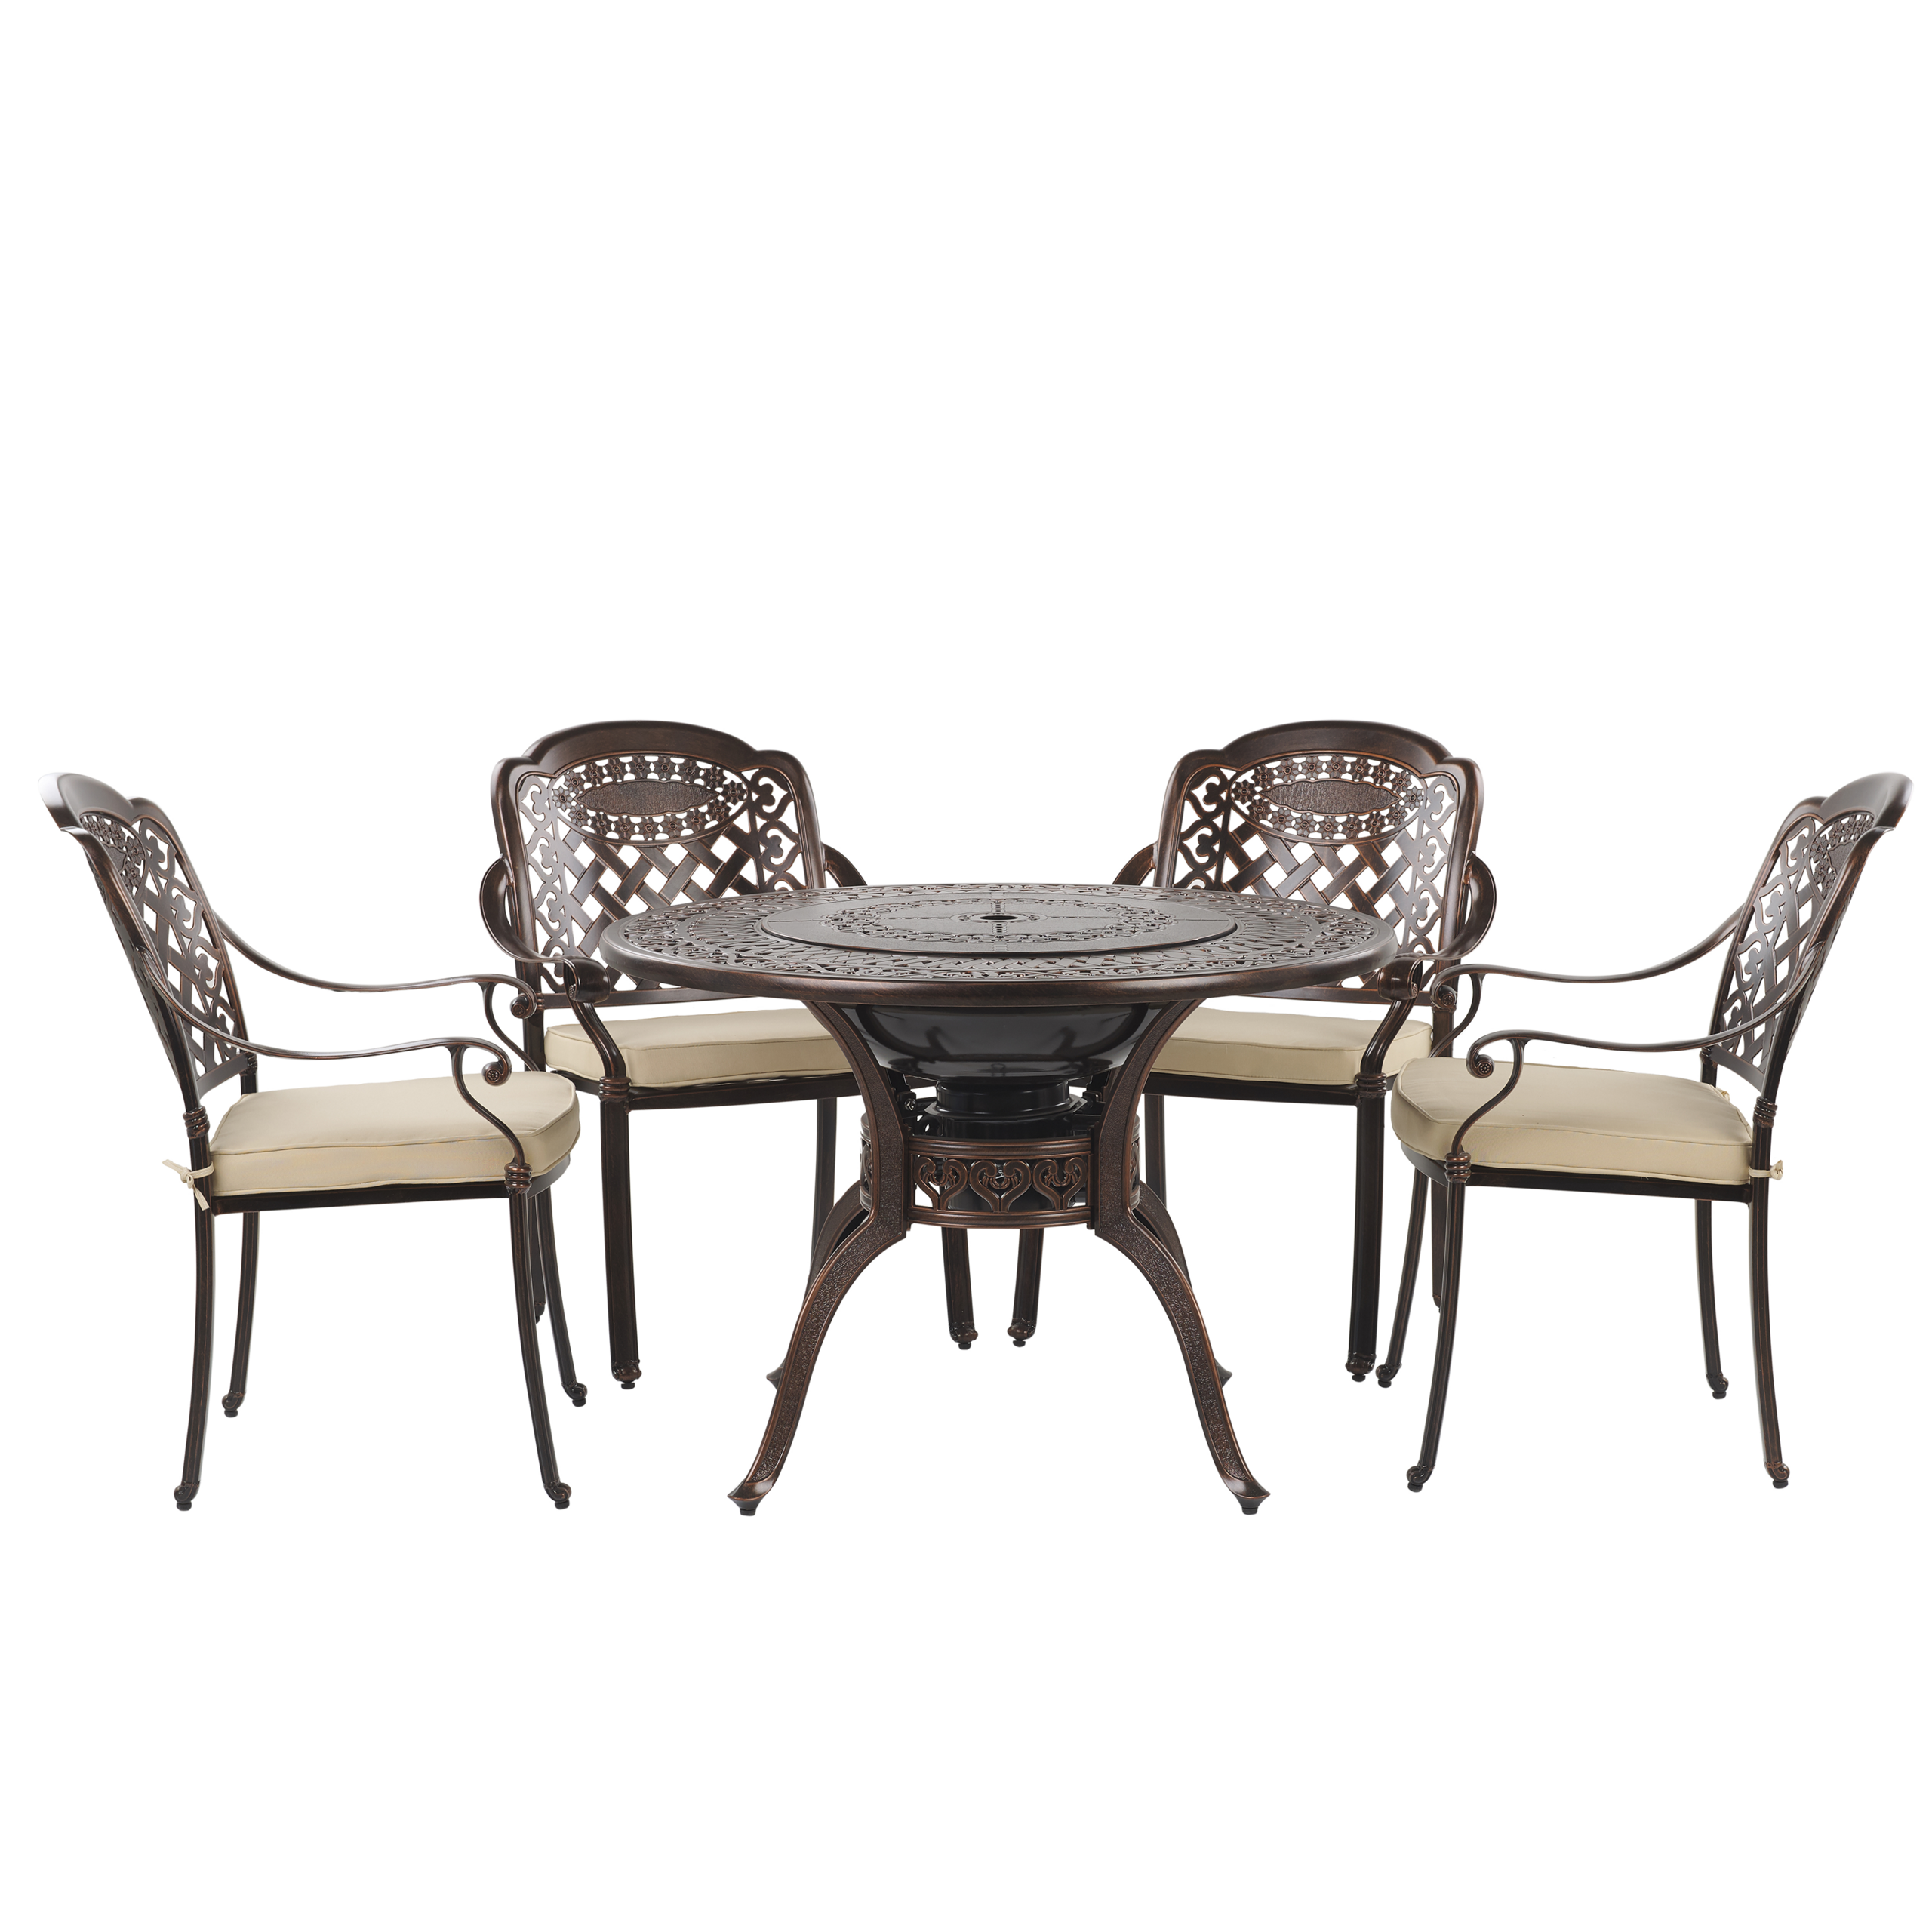 Beliani Outdoor BBQ Dining Set Brown Aluminium 1 Grill Table 4 Chairs Garden Vintage